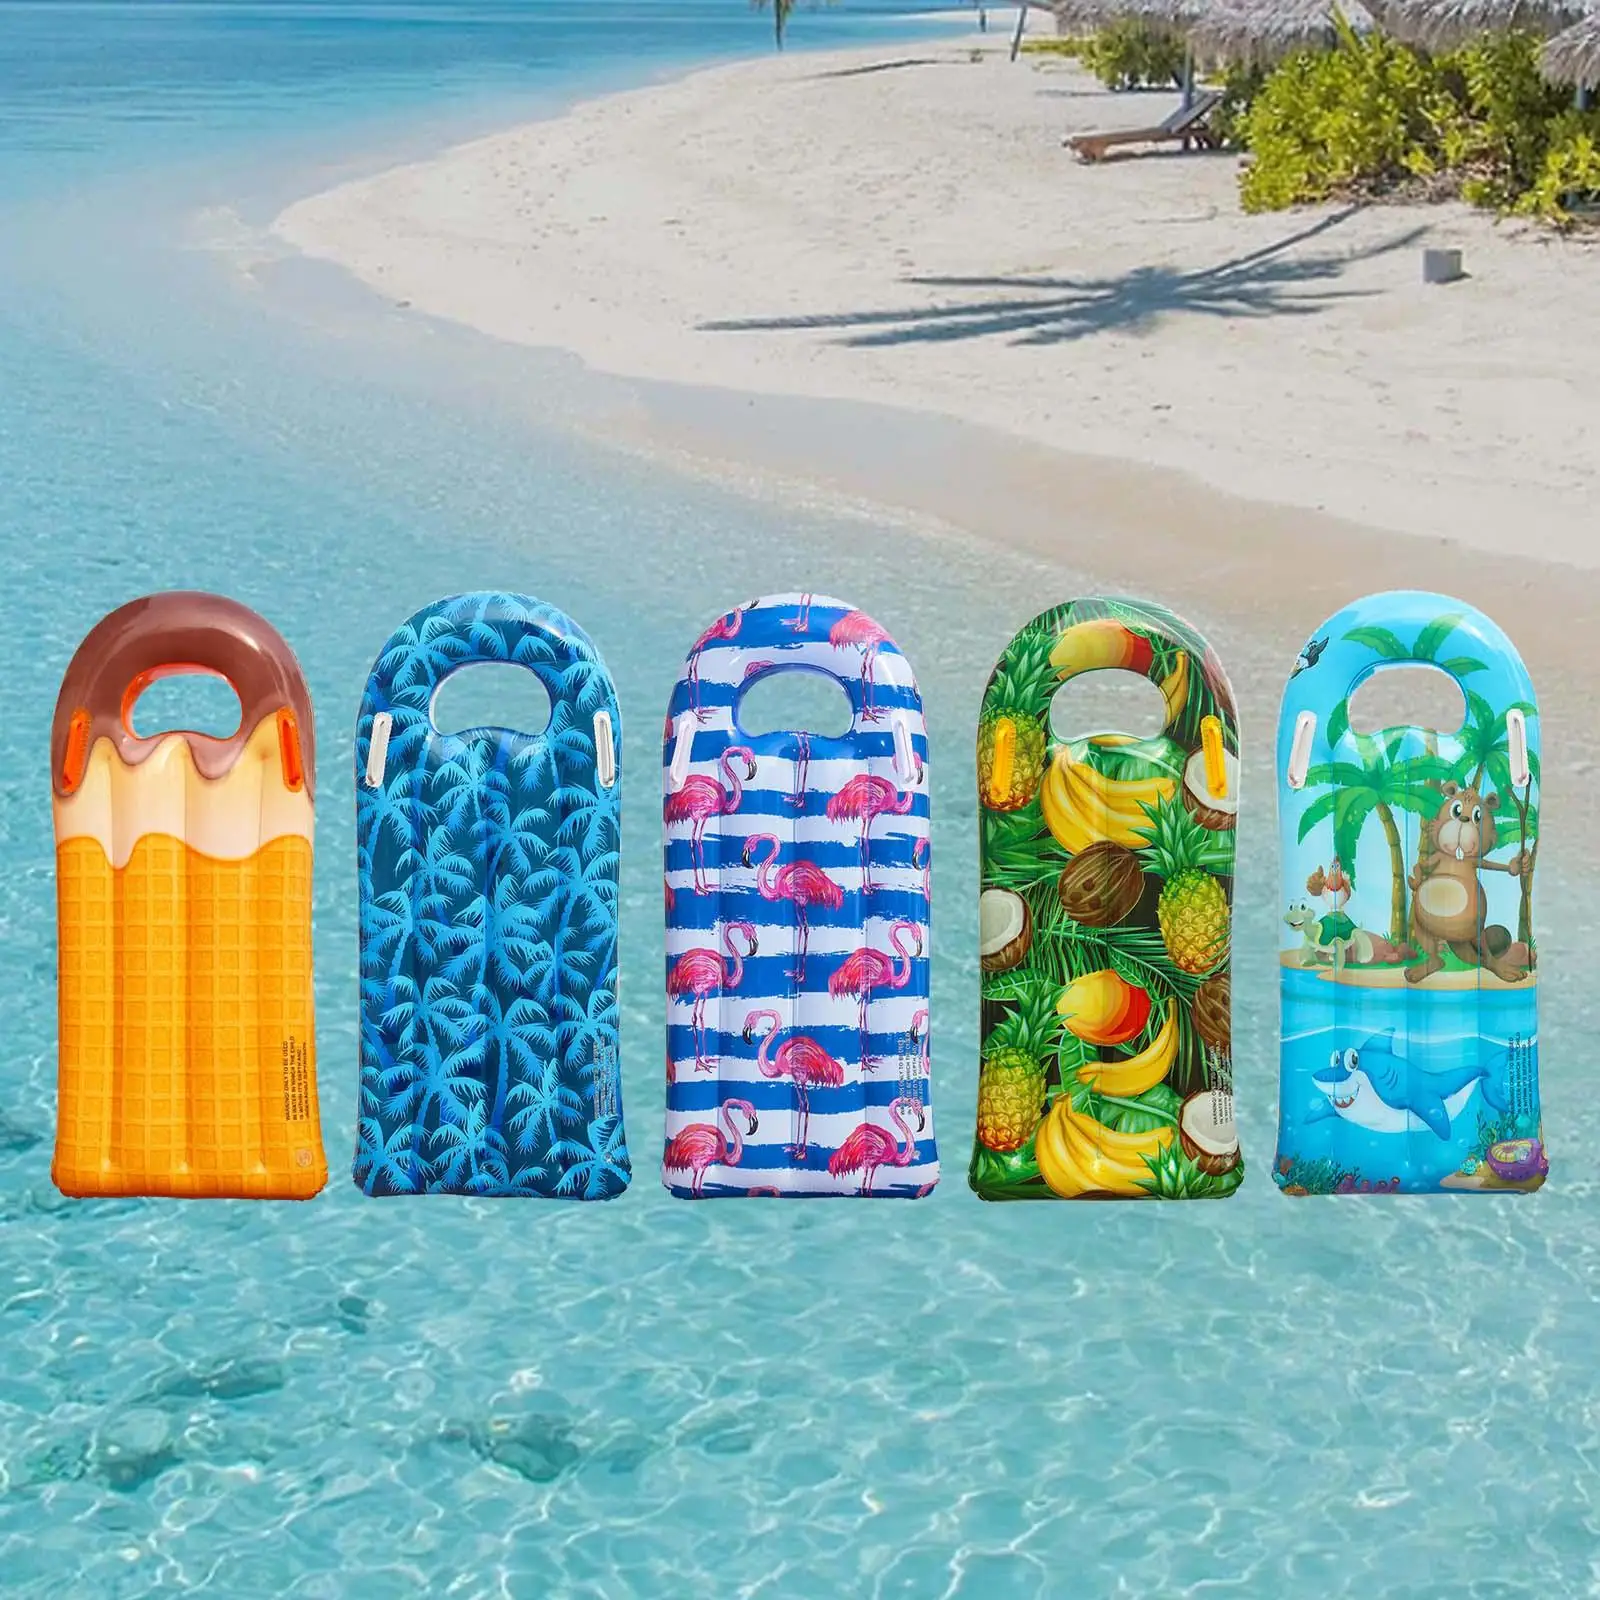 Inflatable Surfboard for Kids Floating Surfboard Pool Toy for Slip and Slide